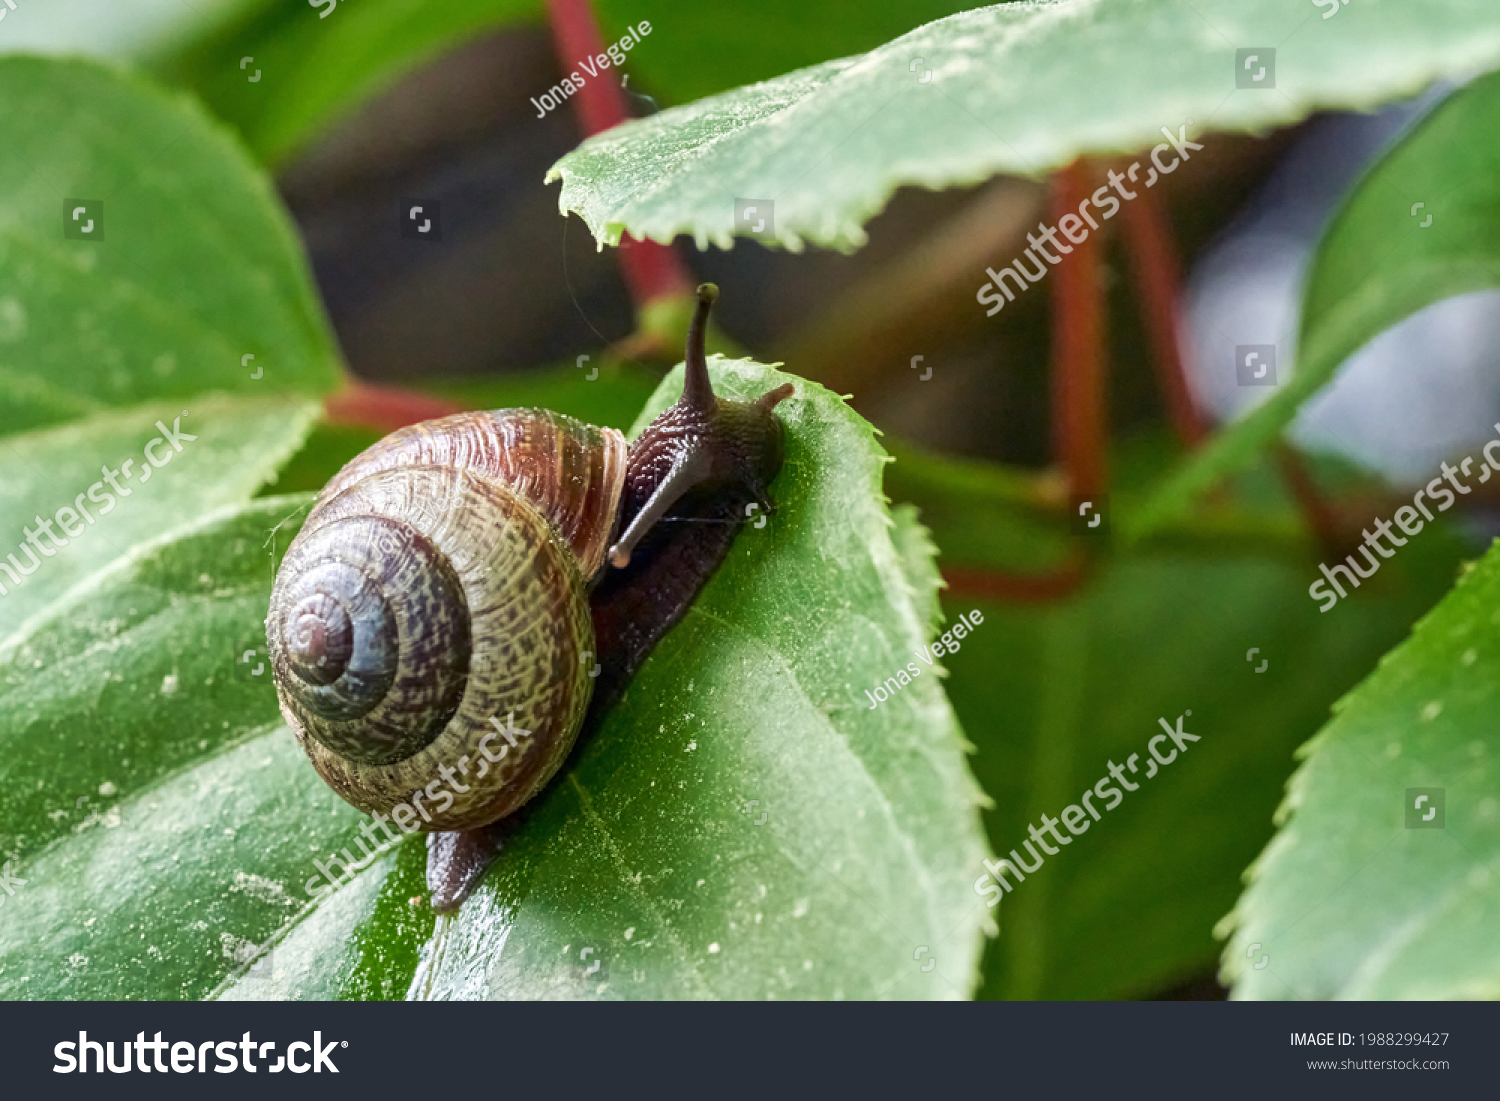 Copse snail gliding on the plant in the garden. Macro, close-up. Copse snail (Arianta arbustorum) is a medium-sized species of land snail. Copse snail is a common pest in agriculture and horticulture. #1988299427